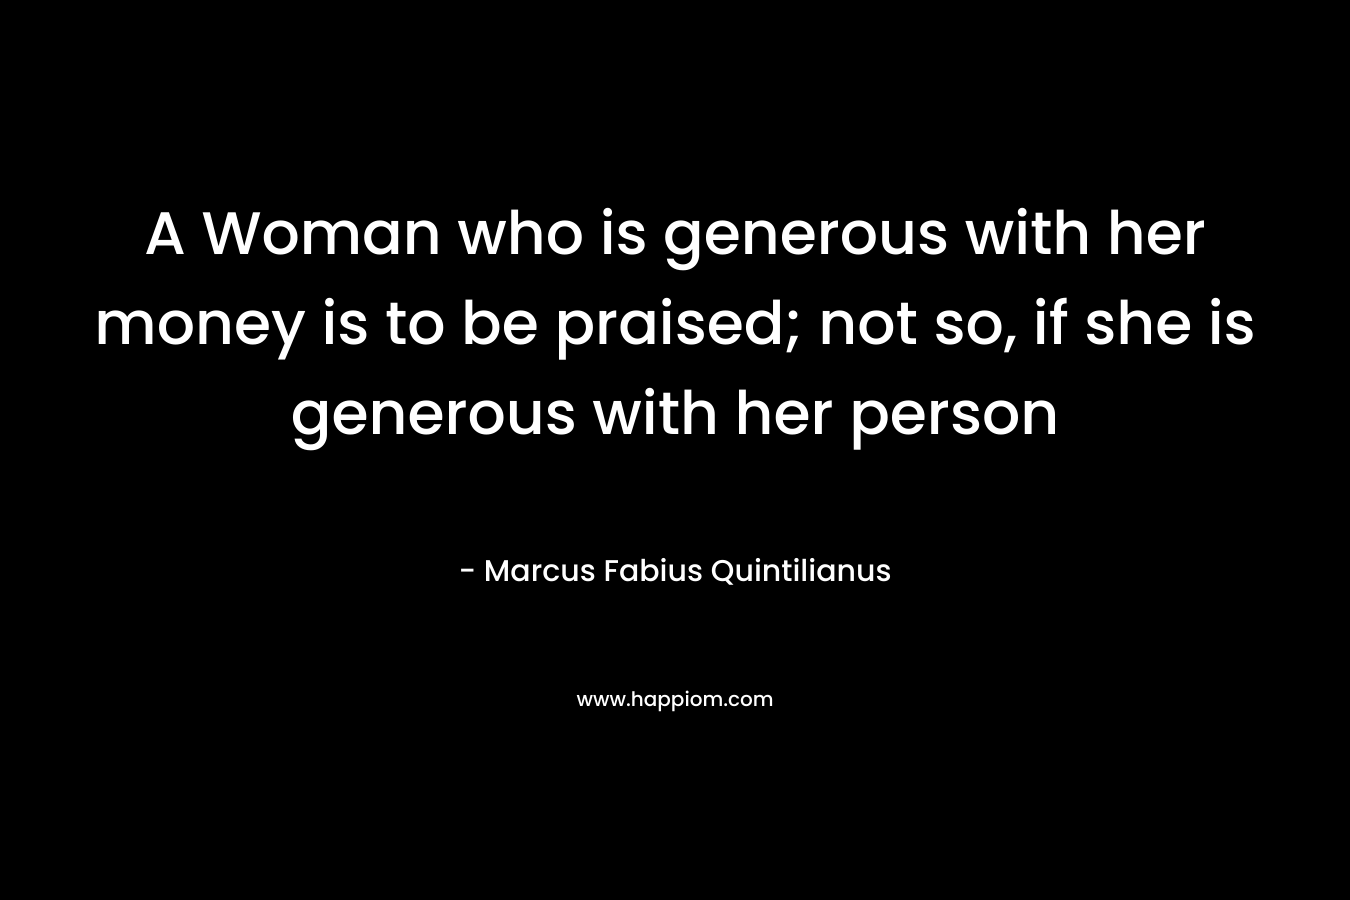 A Woman who is generous with her money is to be praised; not so, if she is generous with her person – Marcus Fabius Quintilianus